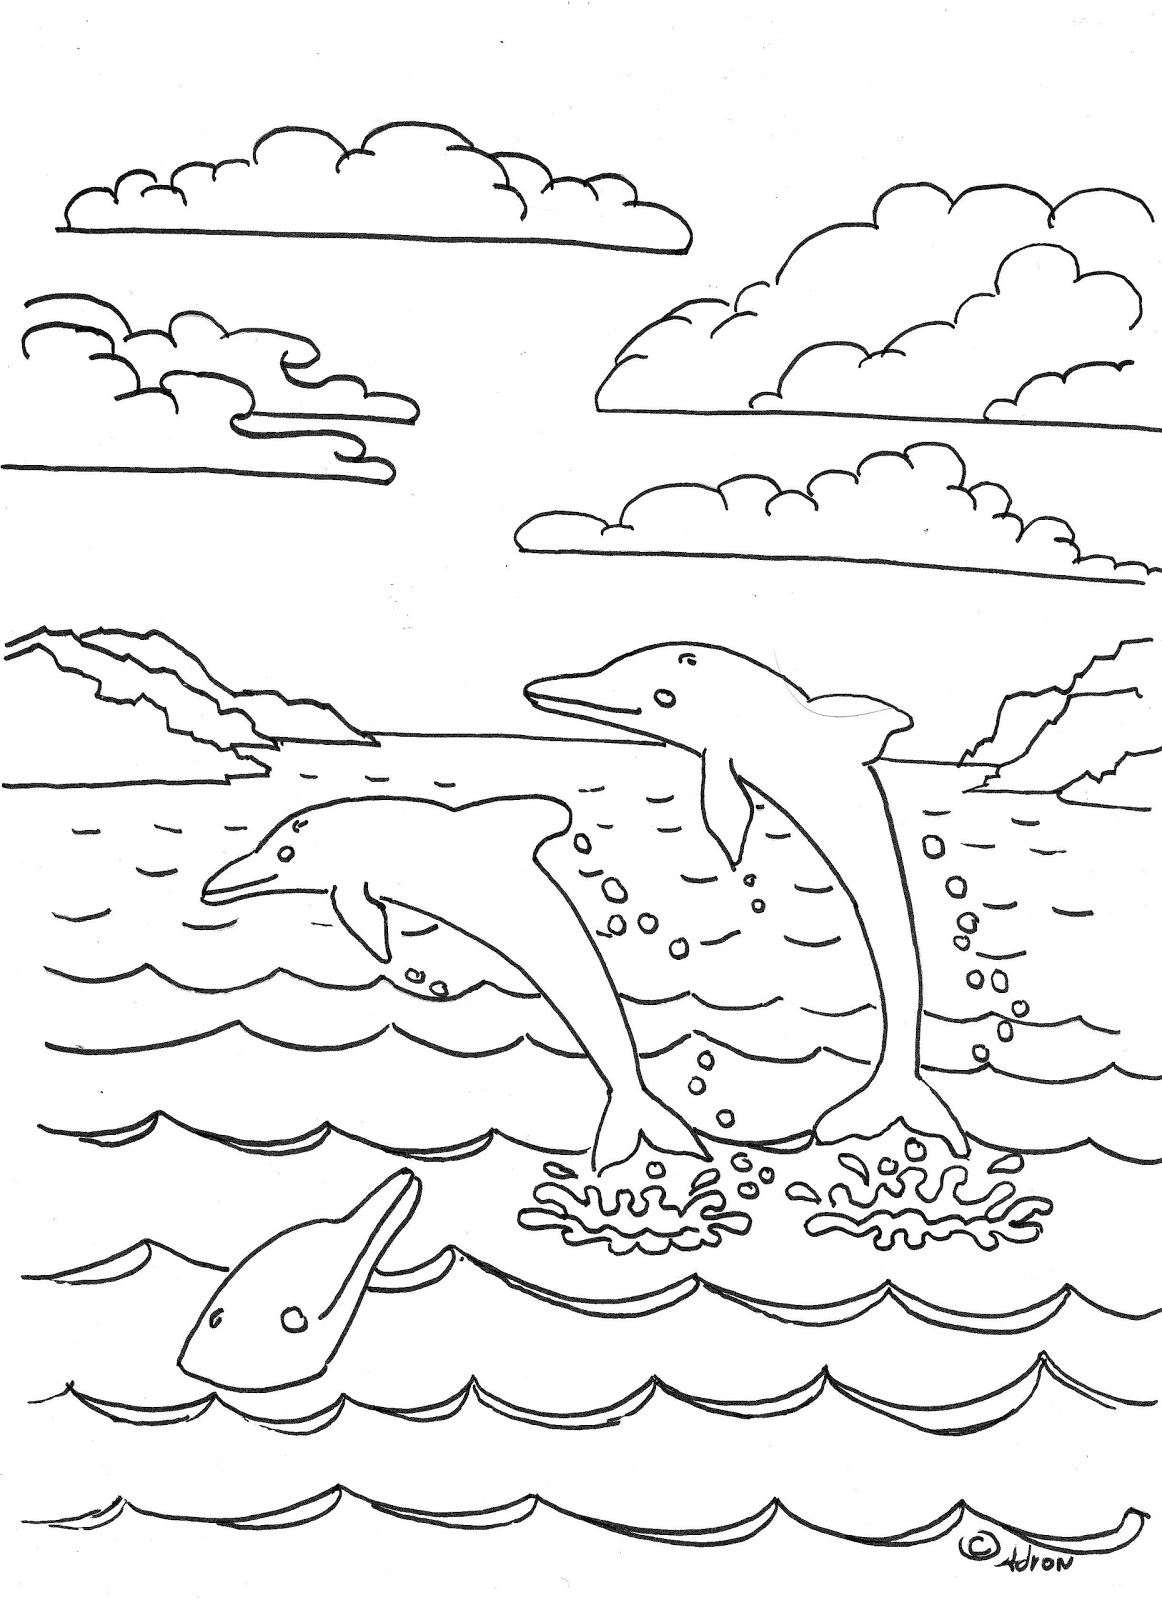 Coloring Pages for Kids by Mr. Adron: Dolphins Coloring ...